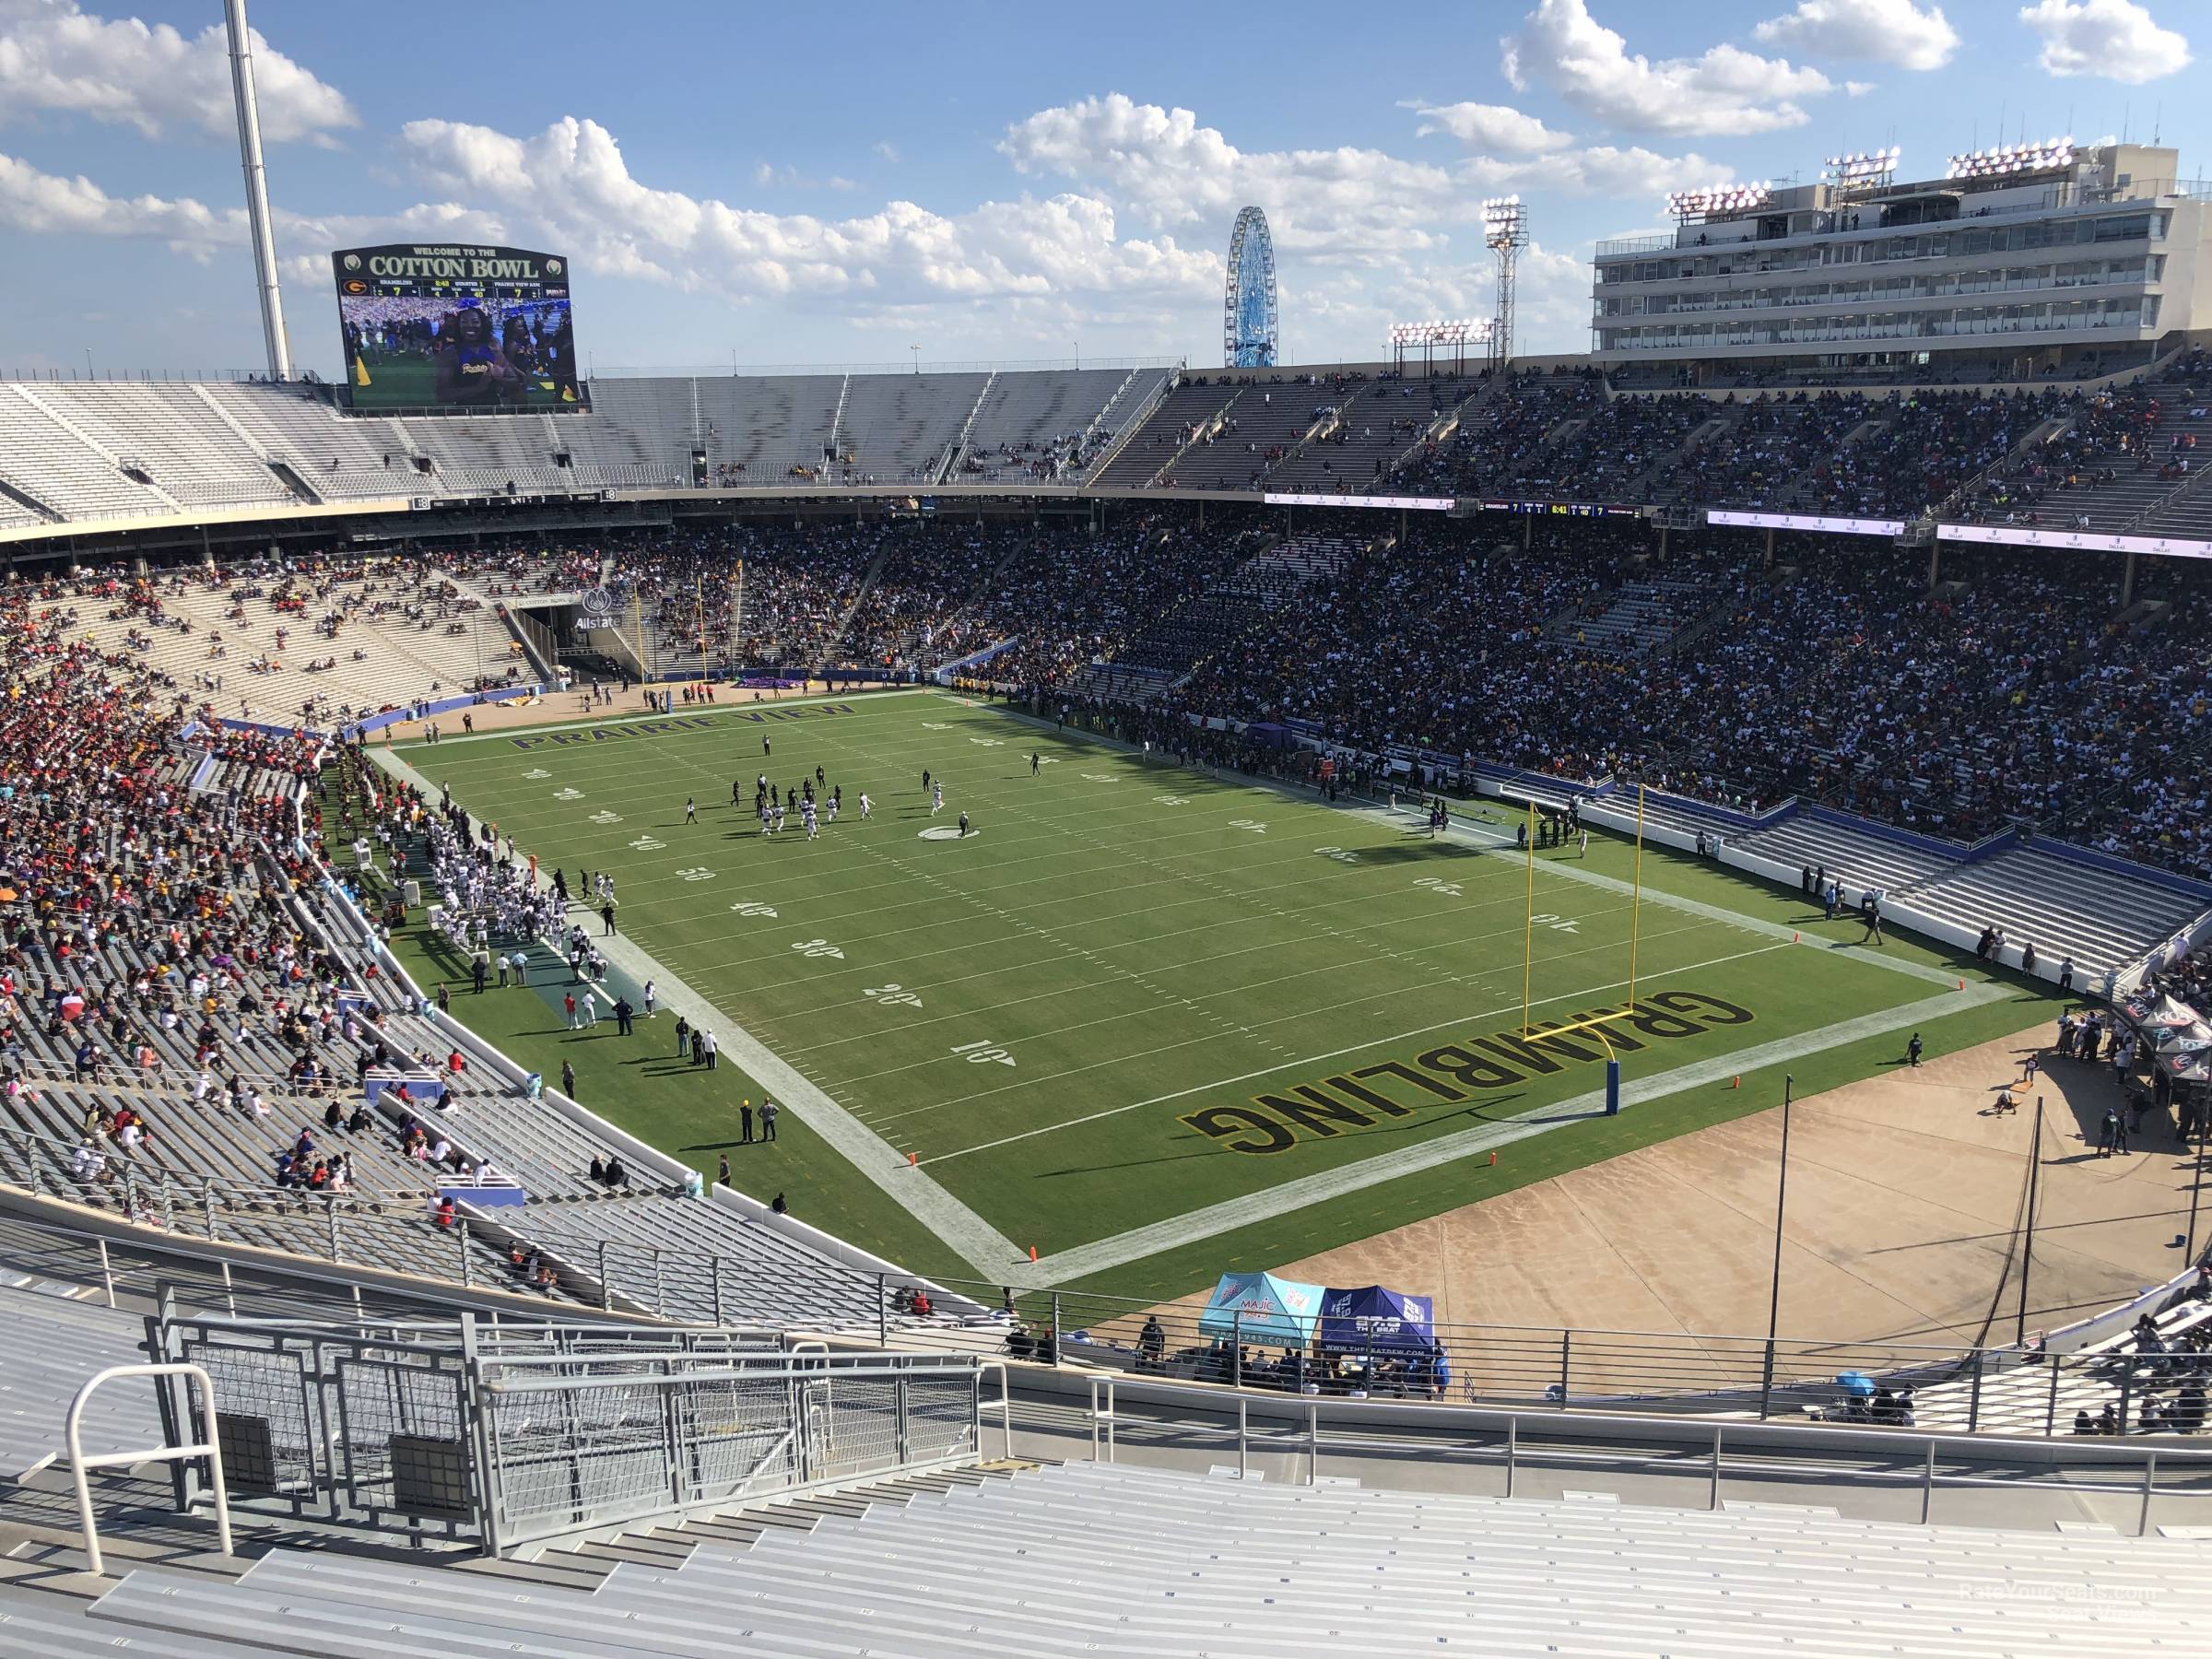 section 120, row 22 seat view  - cotton bowl